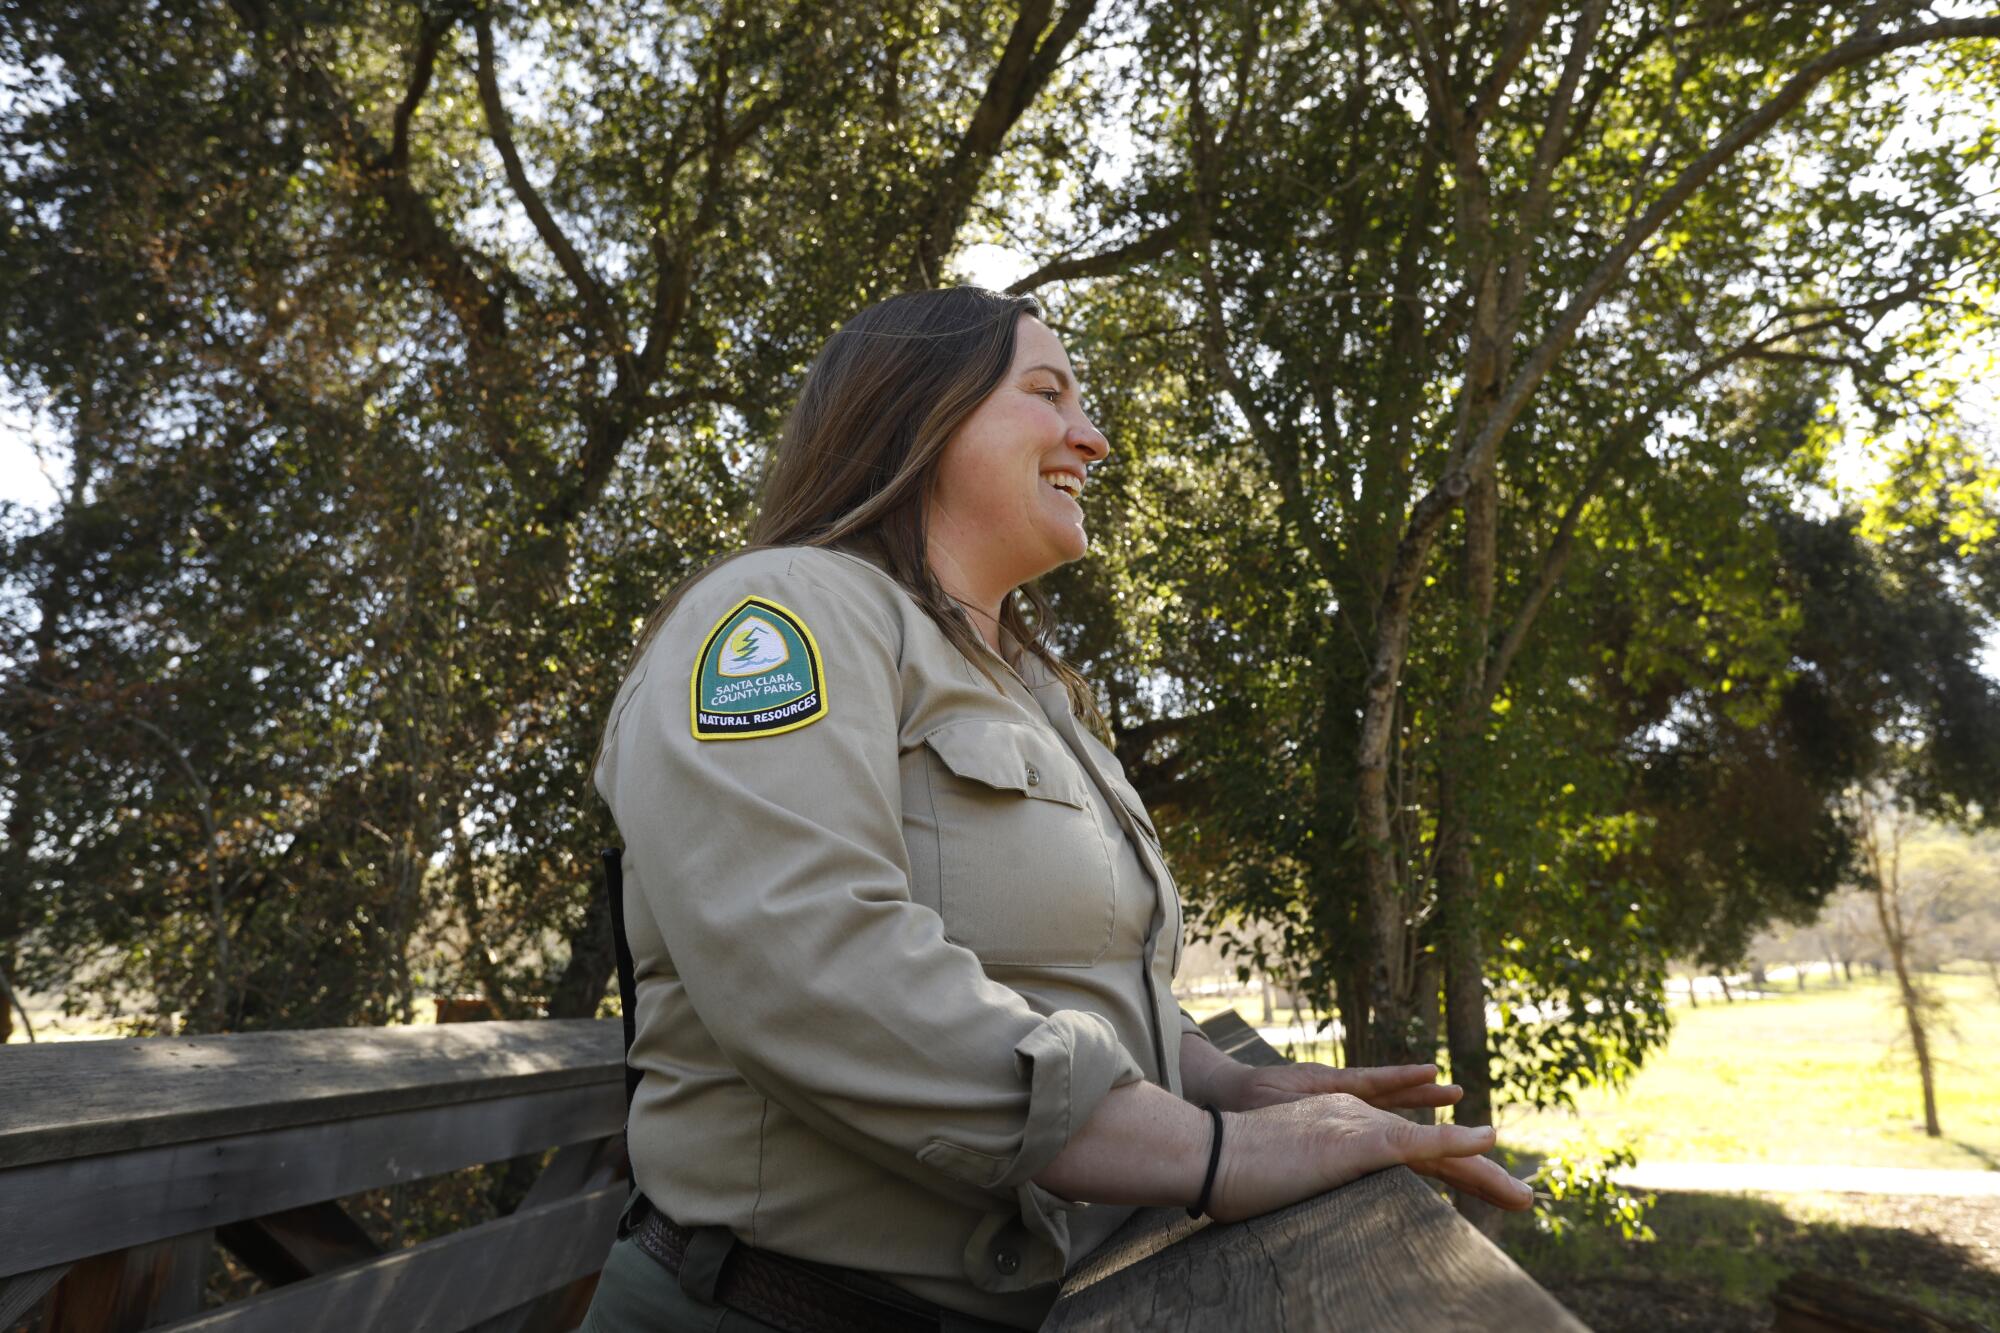 A woman in a uniform smiles outside